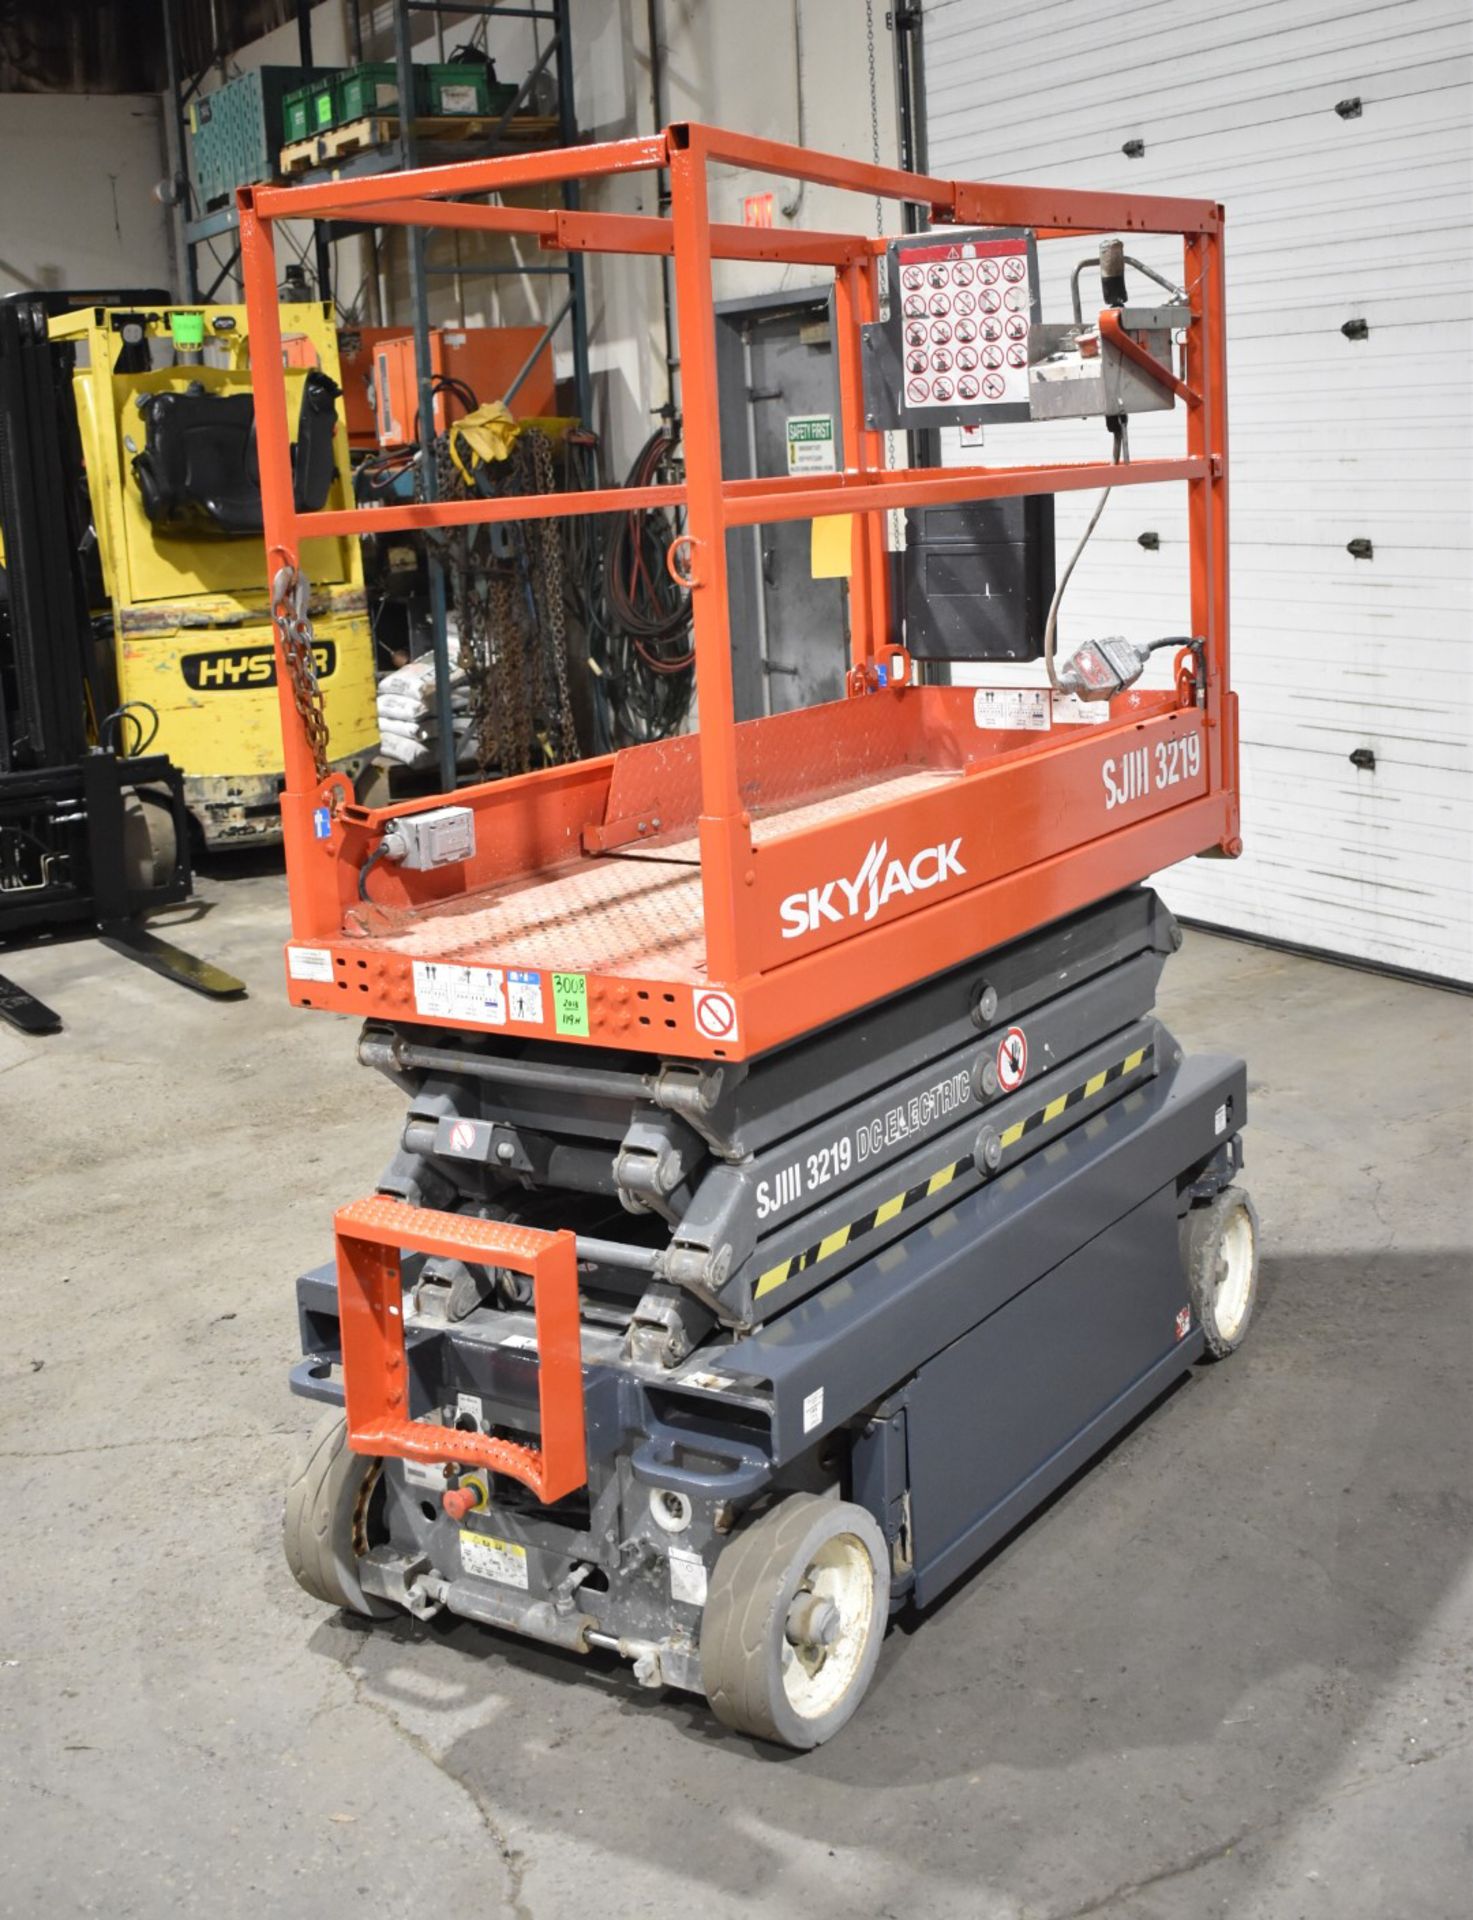 SKYJACK (2013) III 3219 ELECTRIC SCISSOR LIFT WITH 24V BATTERY, 550LBS CAPACITY, 19' MAX HEIGHT, - Image 2 of 8